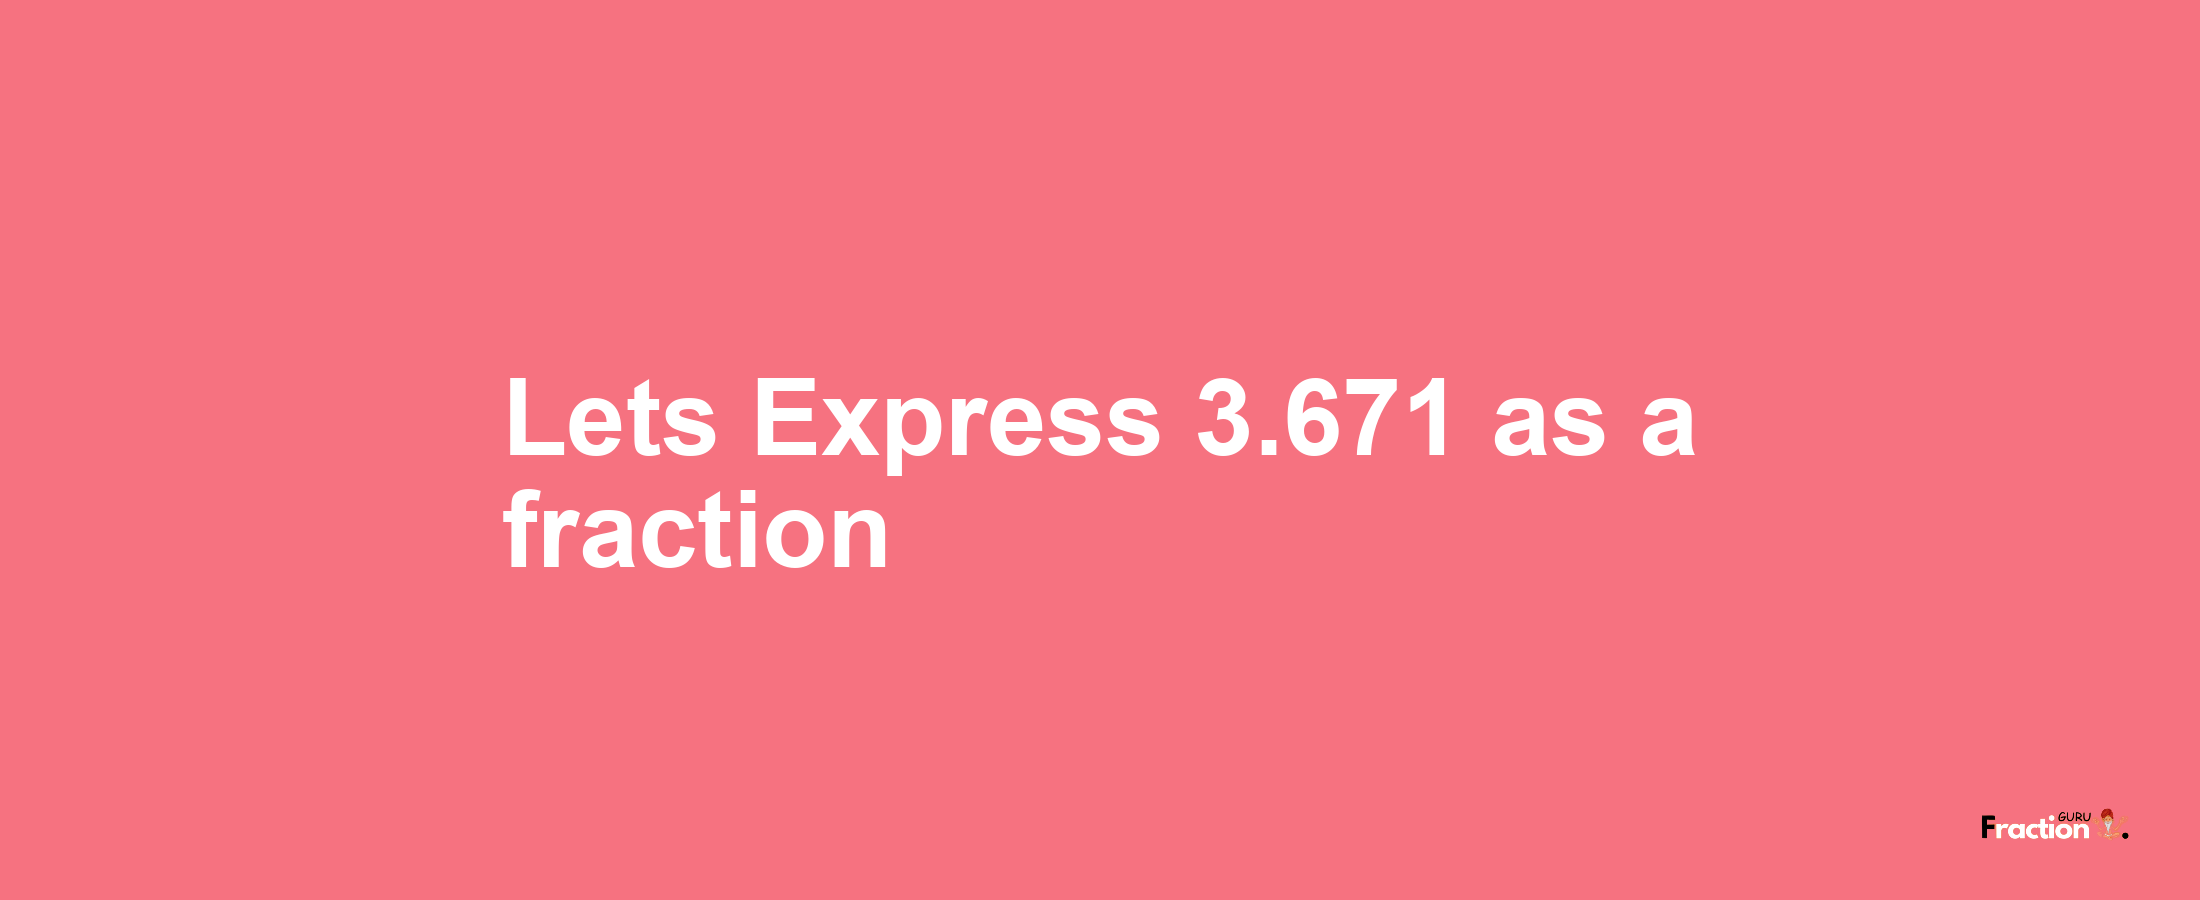 Lets Express 3.671 as afraction